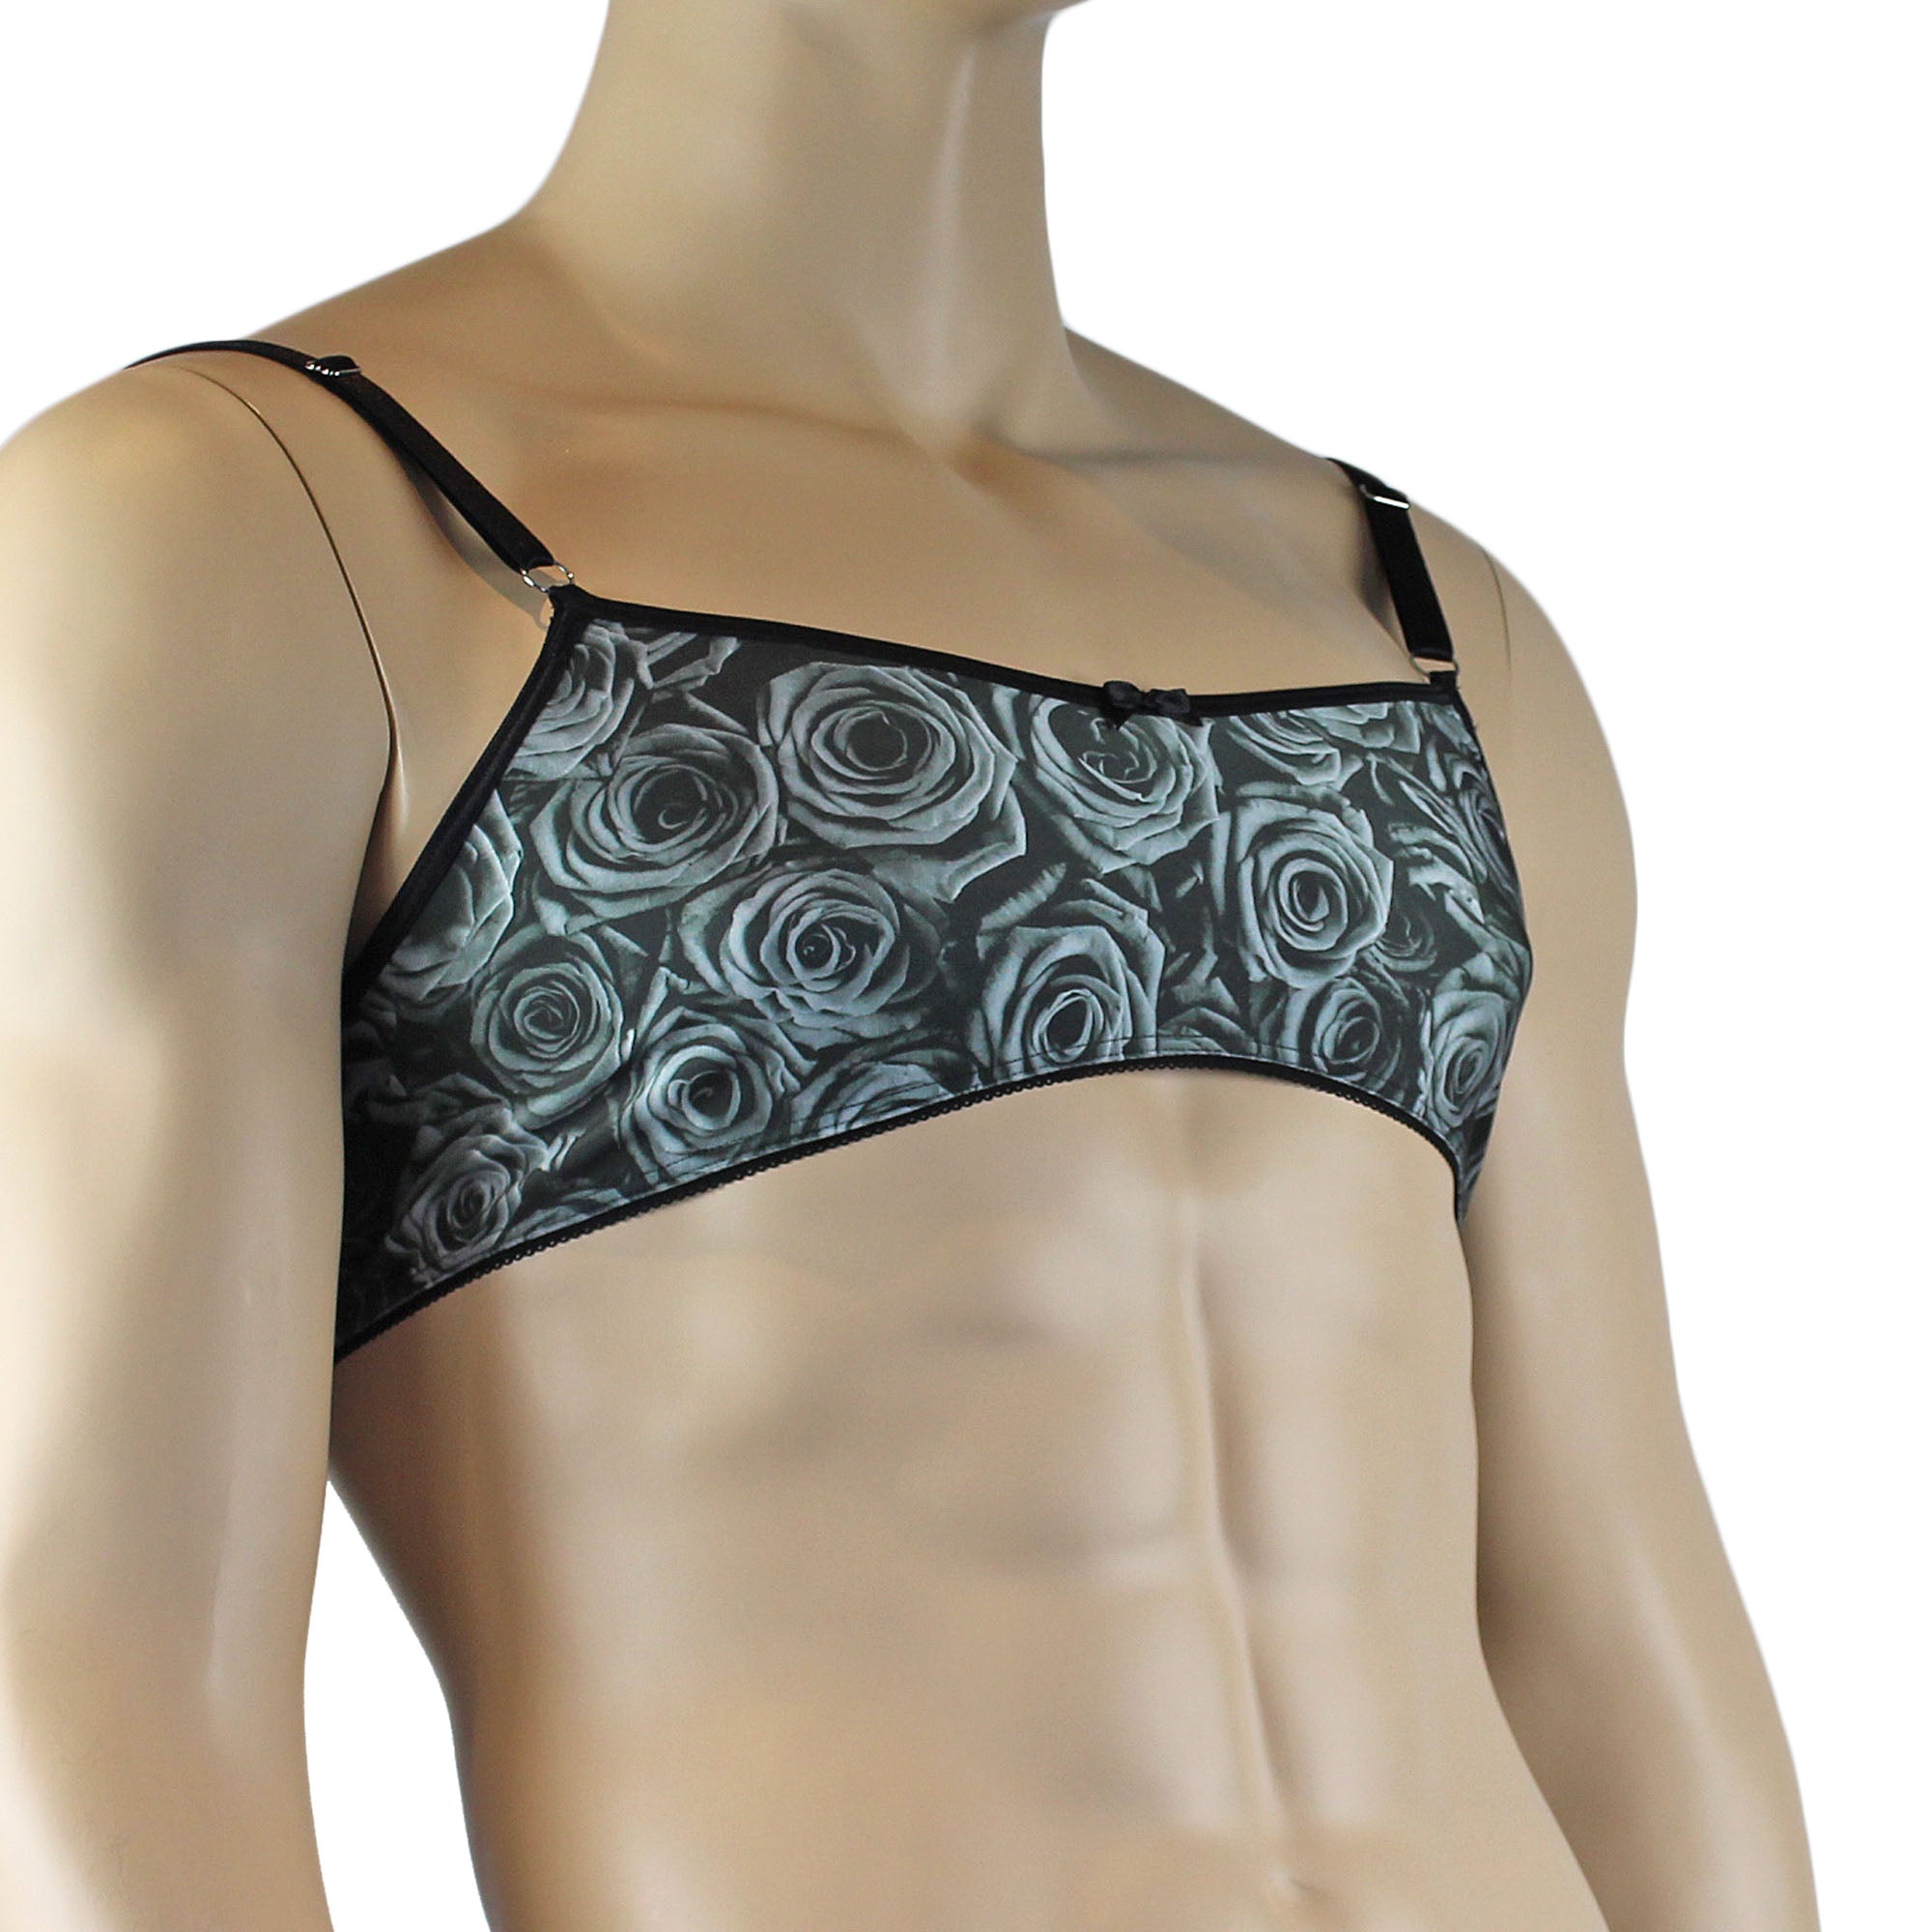 Mens Roses Spandex Bra Top with Frilled Pico Elastic Trim Male Lingerie Grey